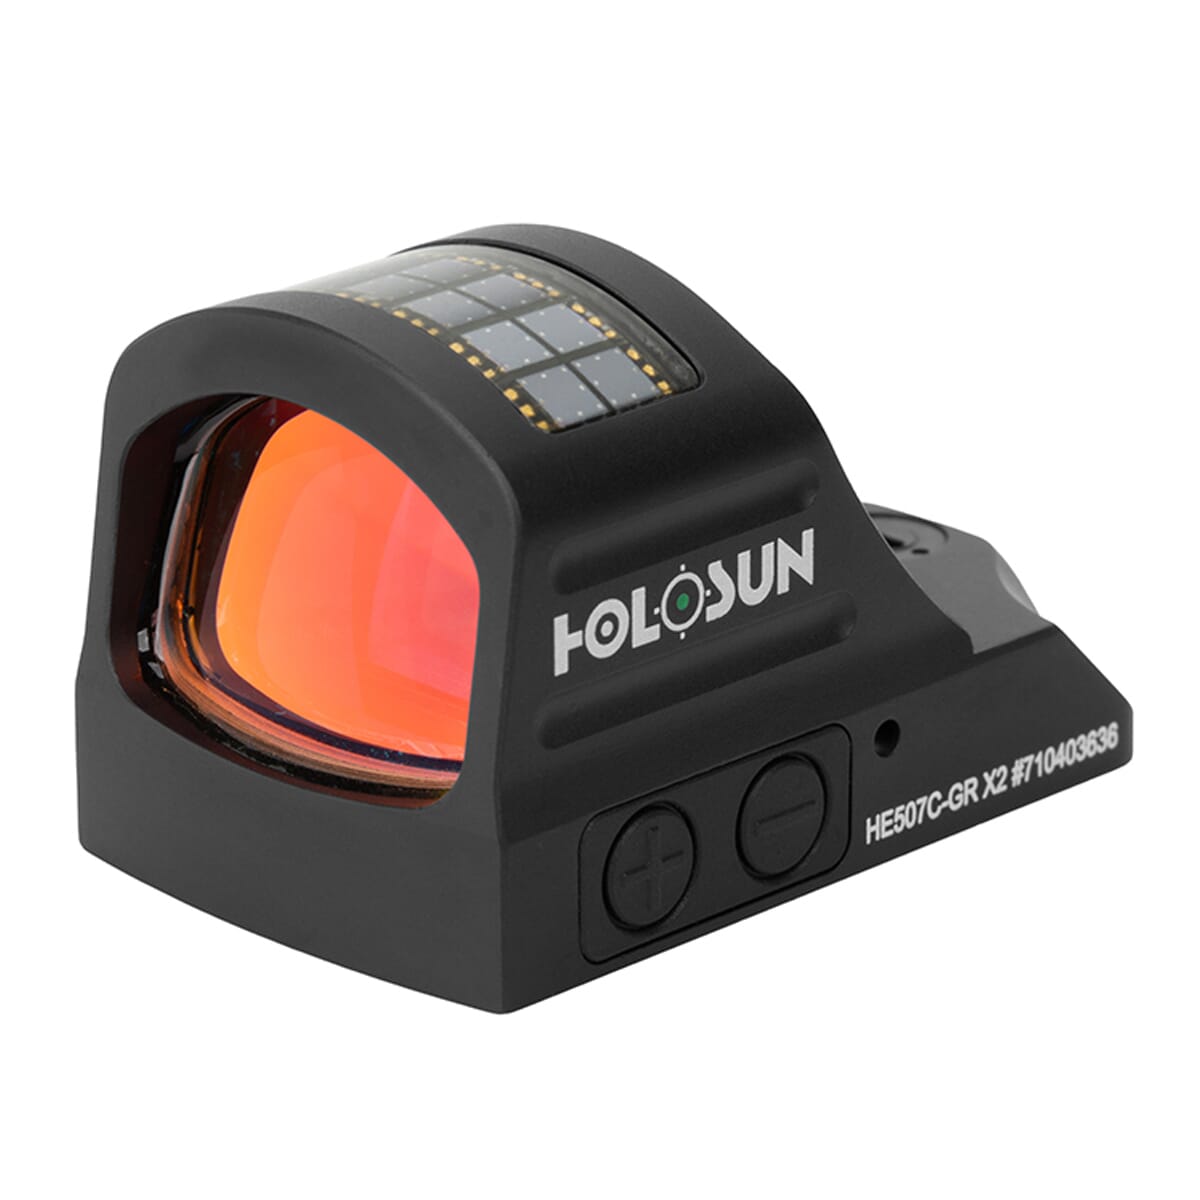 Holosun HE507C-GR-X2 Green Multi-Reticle Circle Dot Open Reflex Sight with Solar Failsafe and Shake Awake HE507C-GR-X2